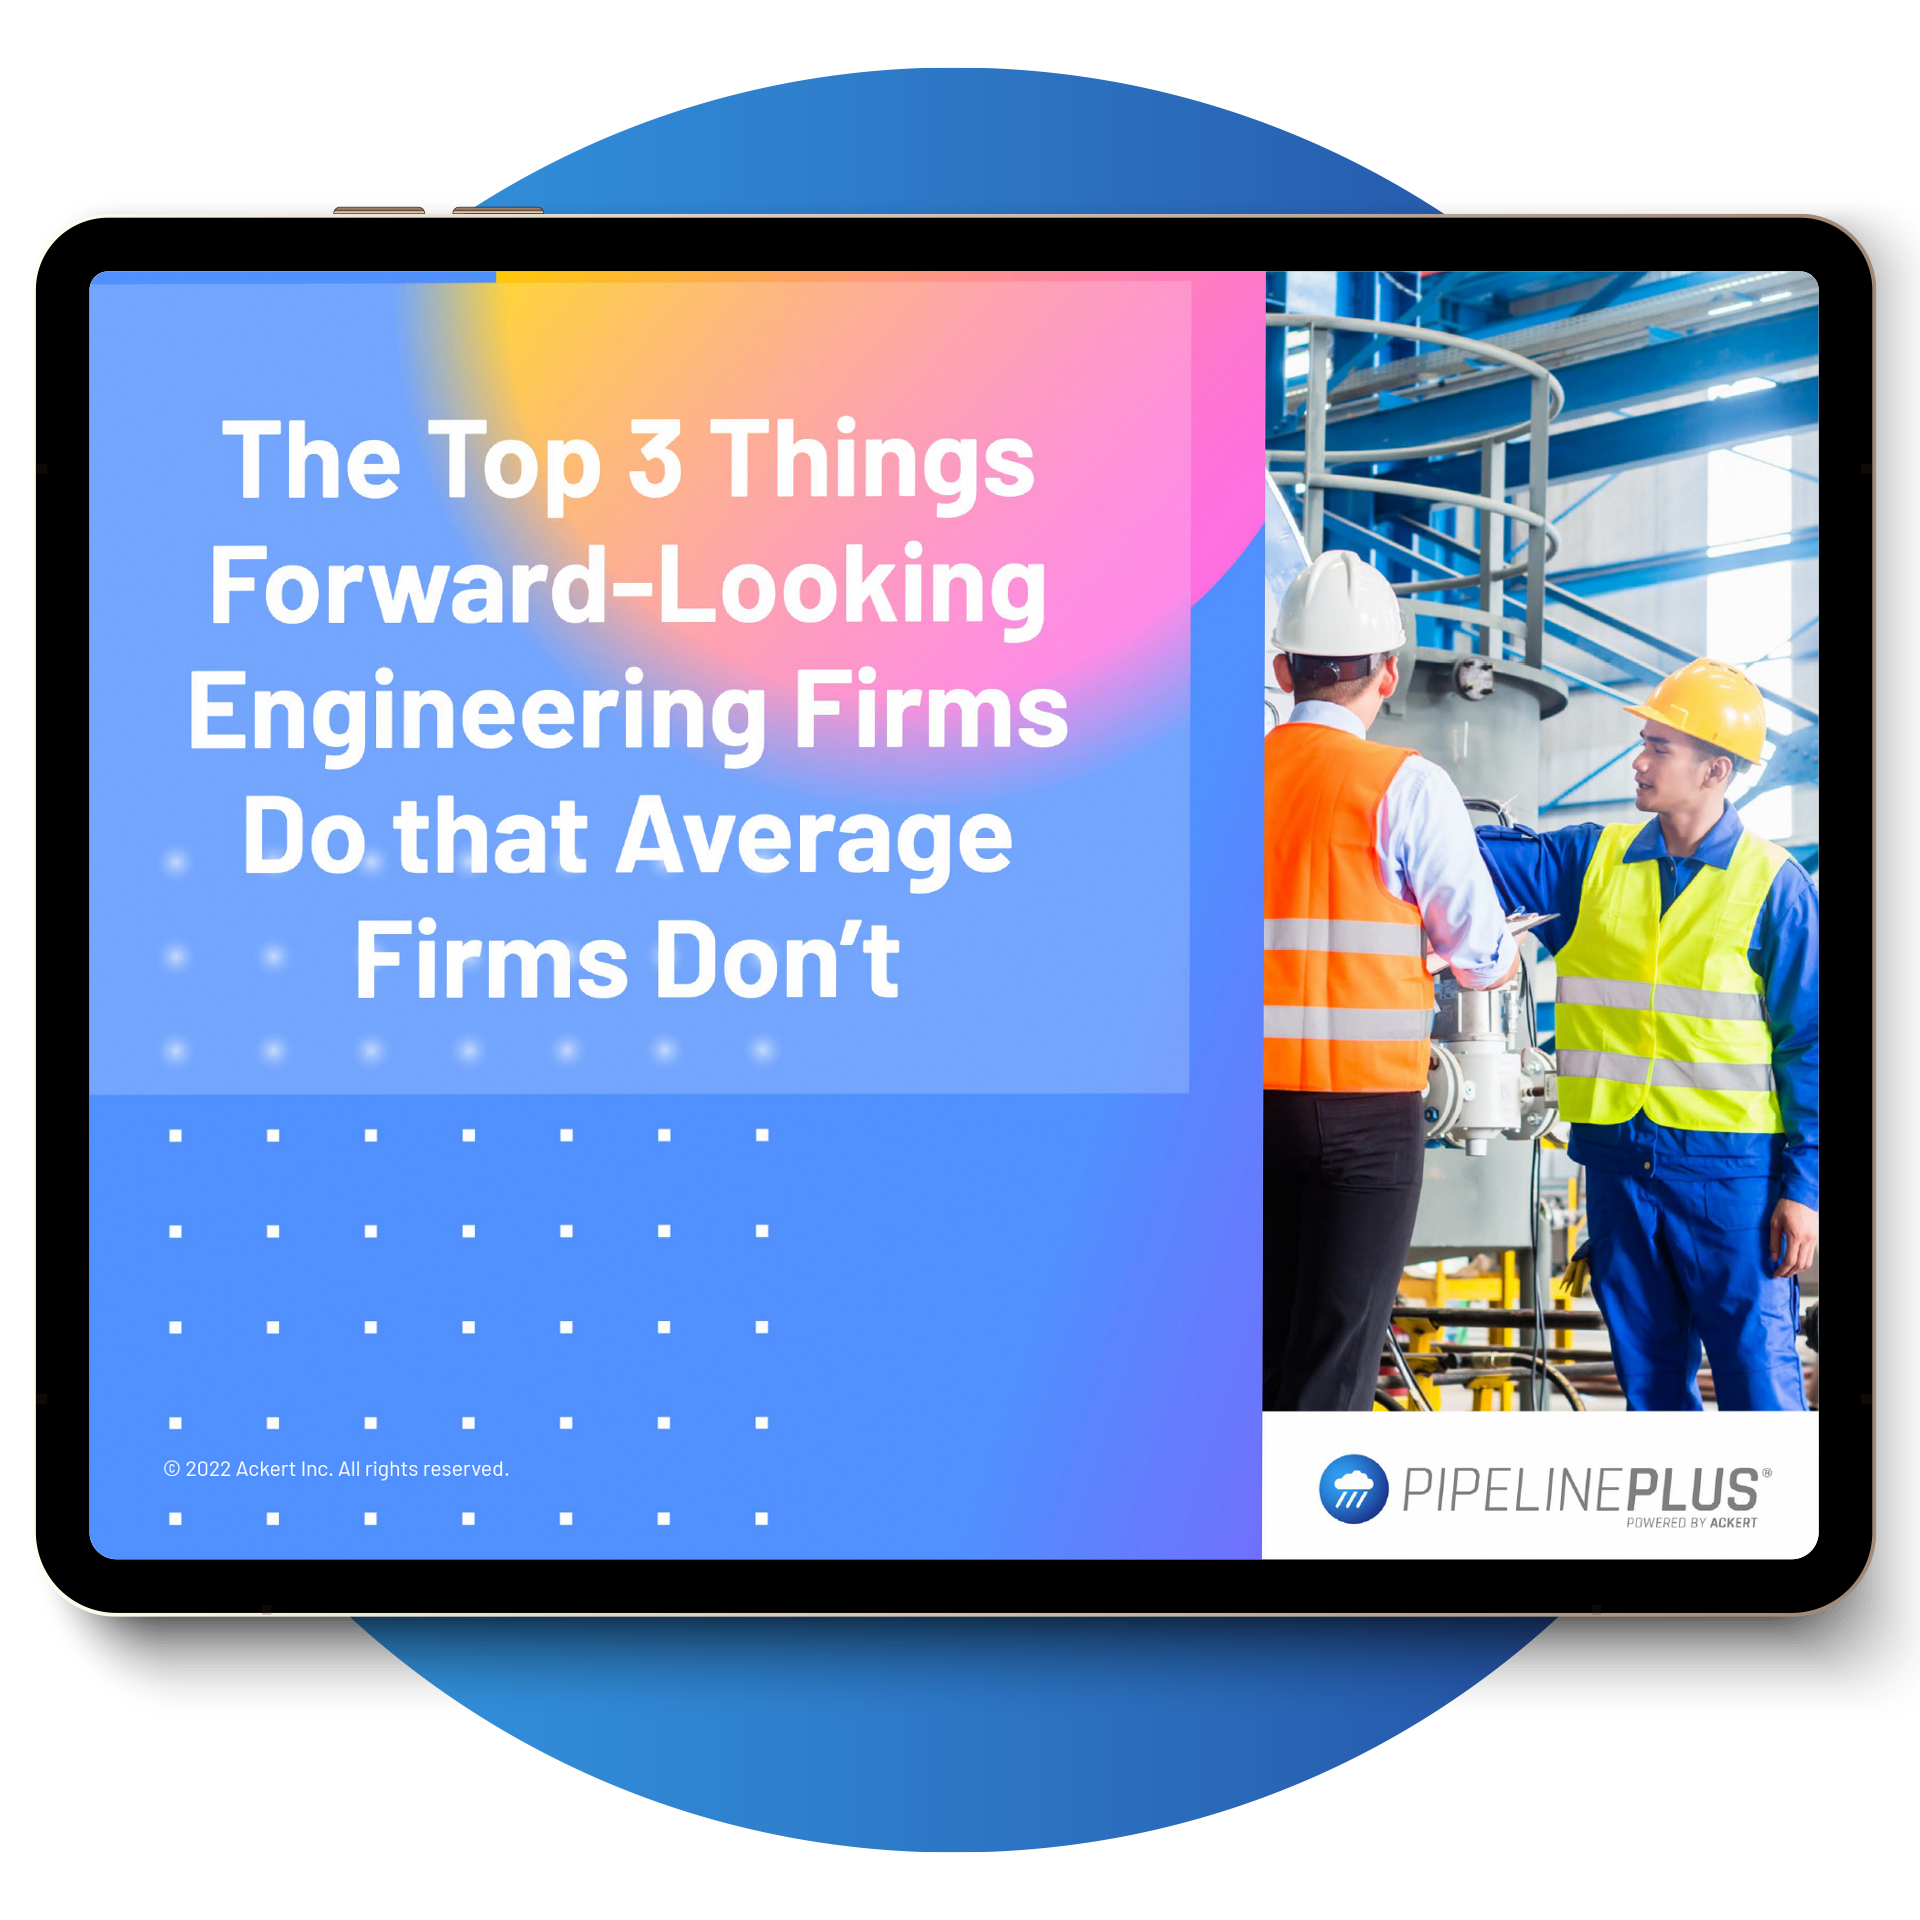 Free Guide Download | The Top 3 Things Forward-Looking Engineering Firms Do that Average Firms Don’t